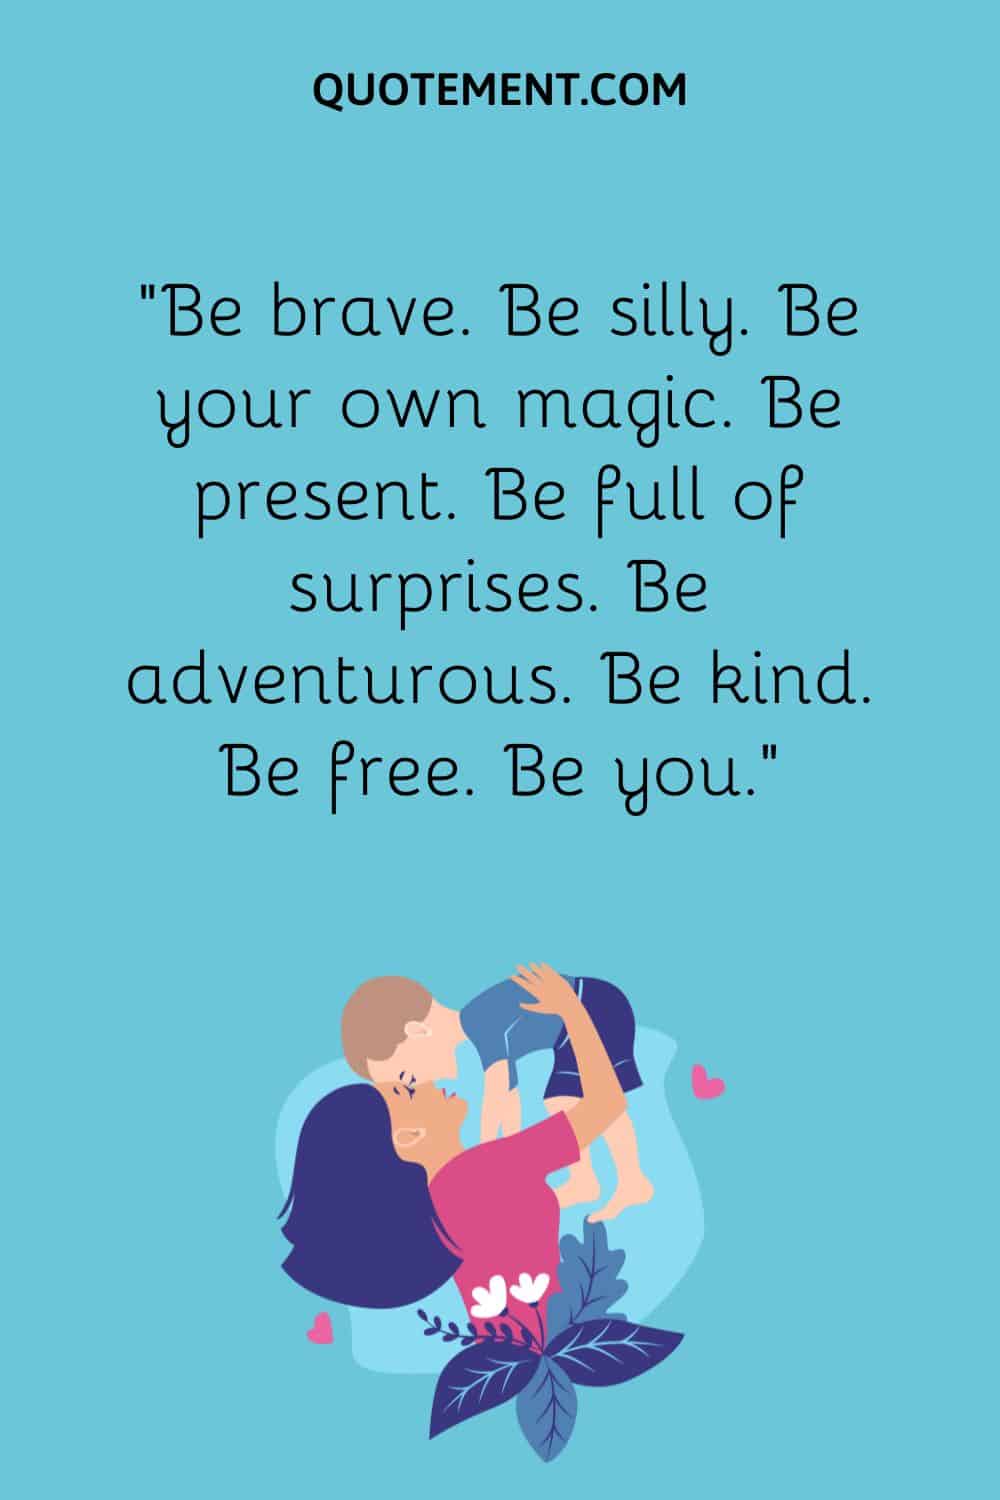 “Be brave. Be silly. Be your own magic. Be present. Be full of surprises. Be adventurous. Be kind. Be free. Be you.”